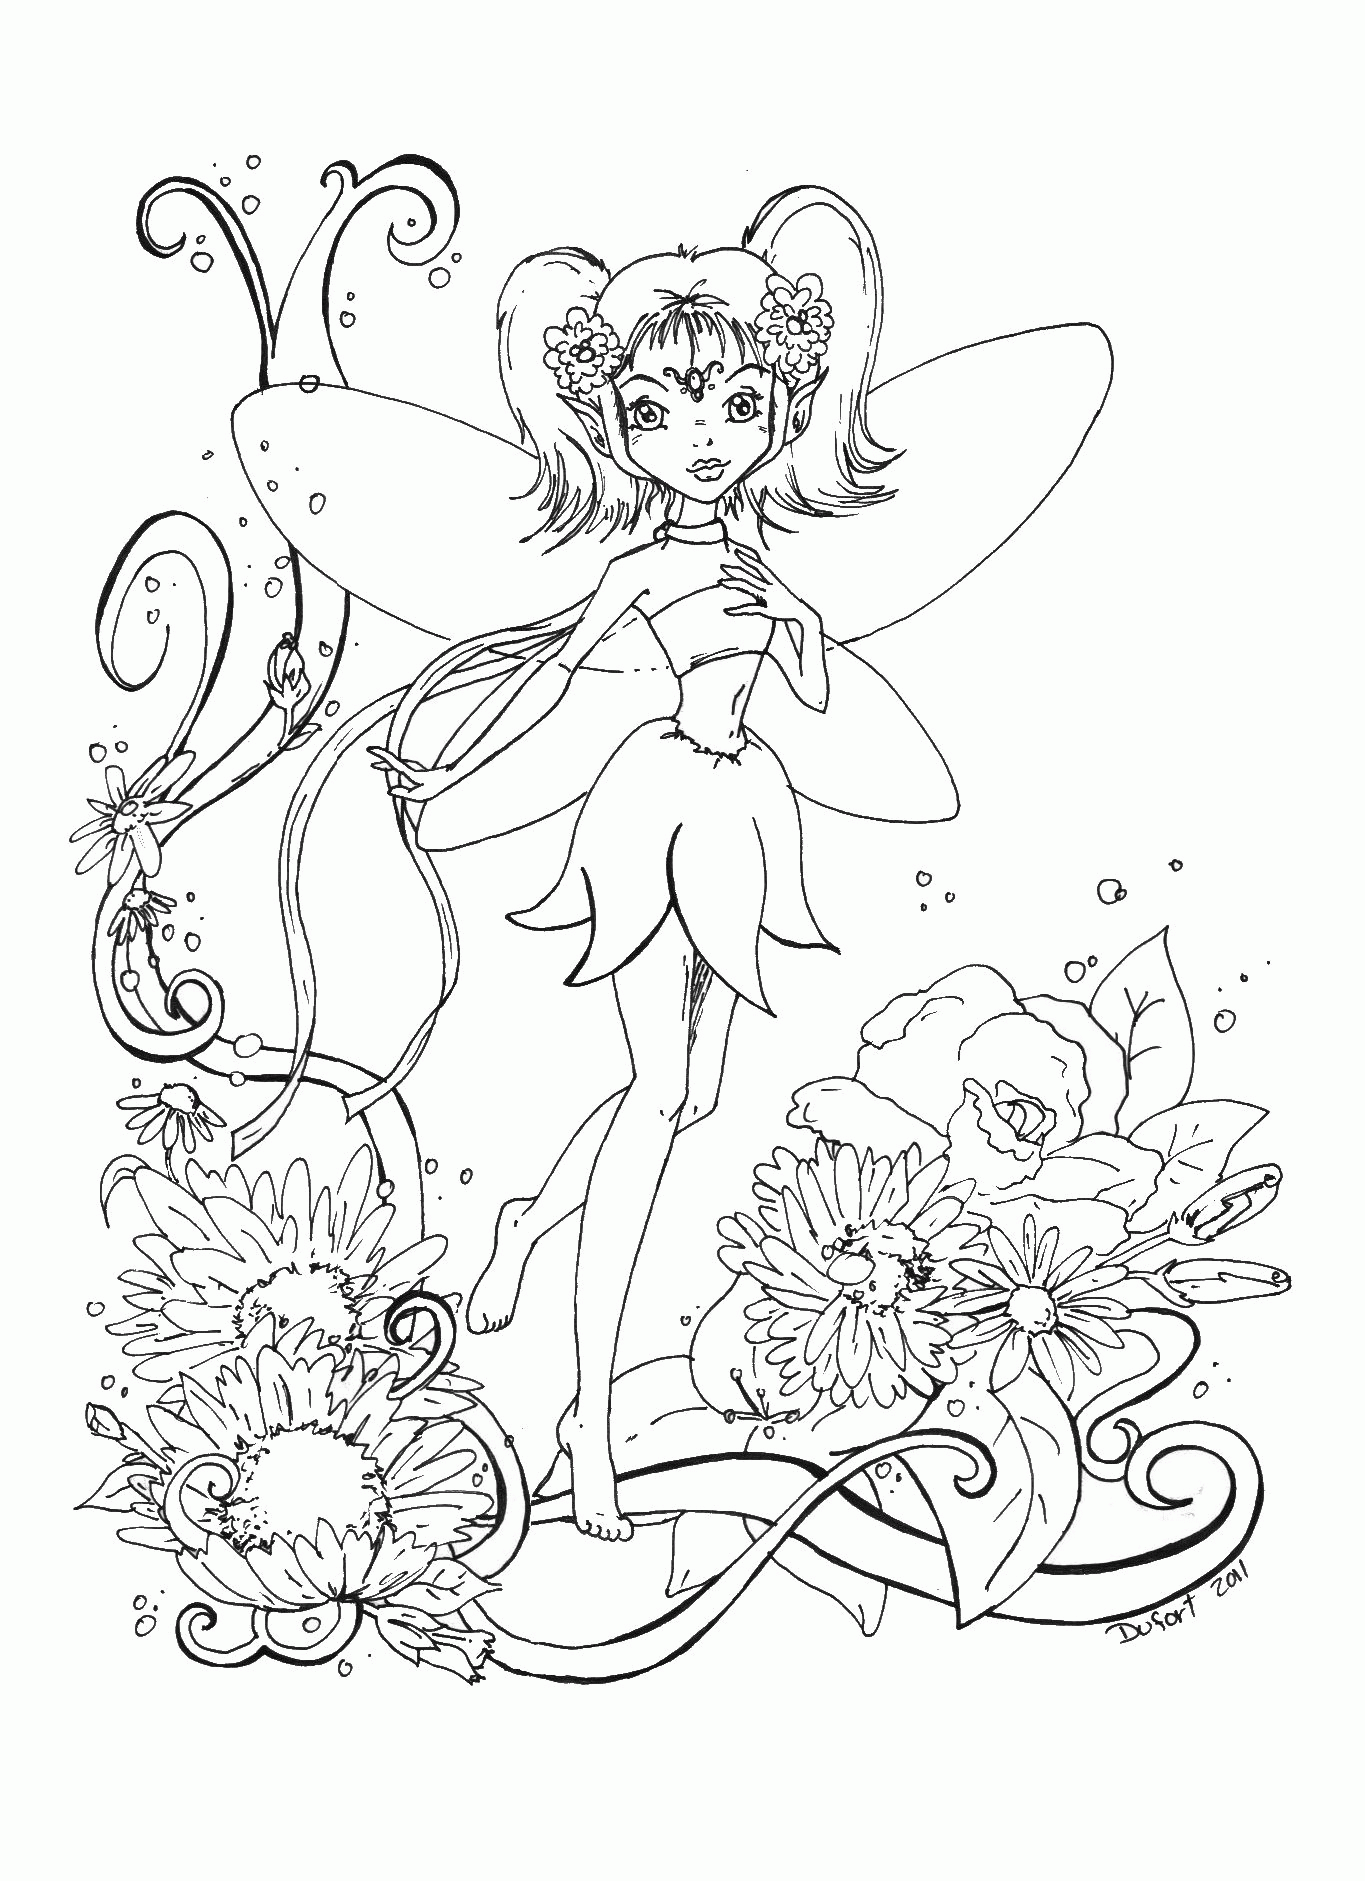 33 Collections of Free Coloring Pages of Fairies - Gianfreda.net